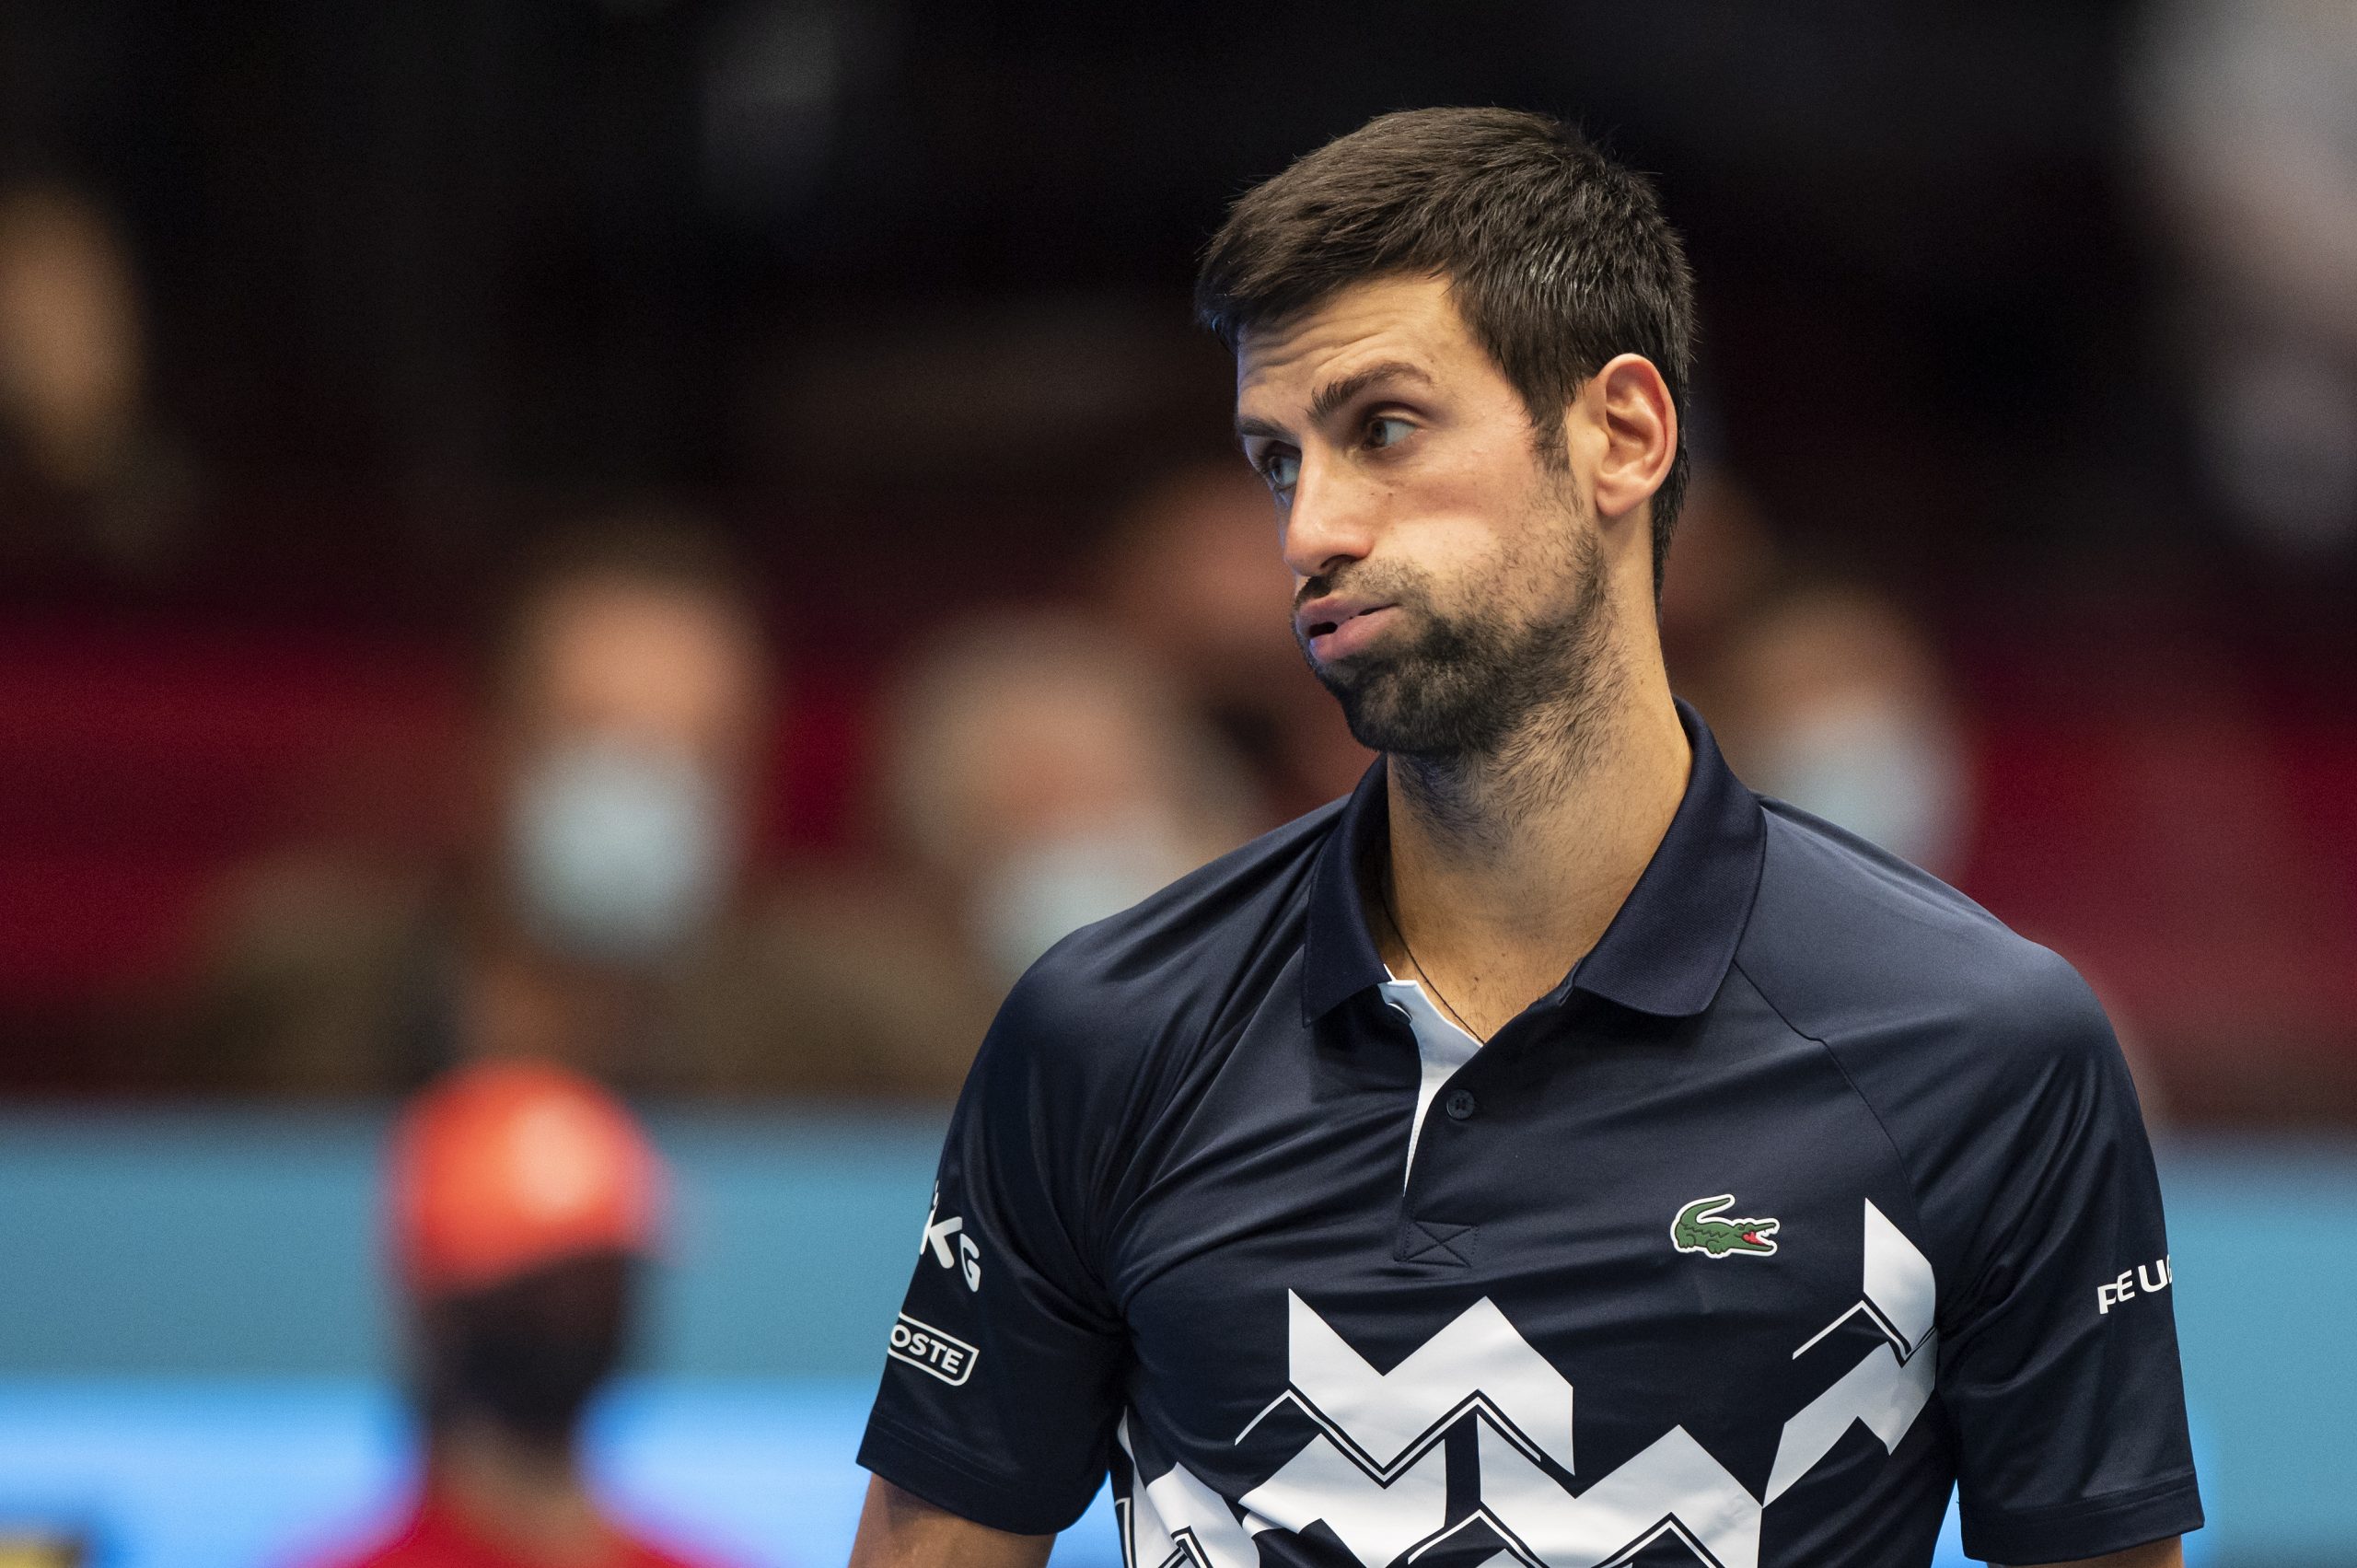 epa08786711 Novak Djokovic of Serbia reacts during his quarter final match against Lorenzo Sonego of Italy at the Erste Bank Open ATP tennis tournament in Vienna, Austria, 30 October 2020.  EPA/CHRISTIAN BRUNA